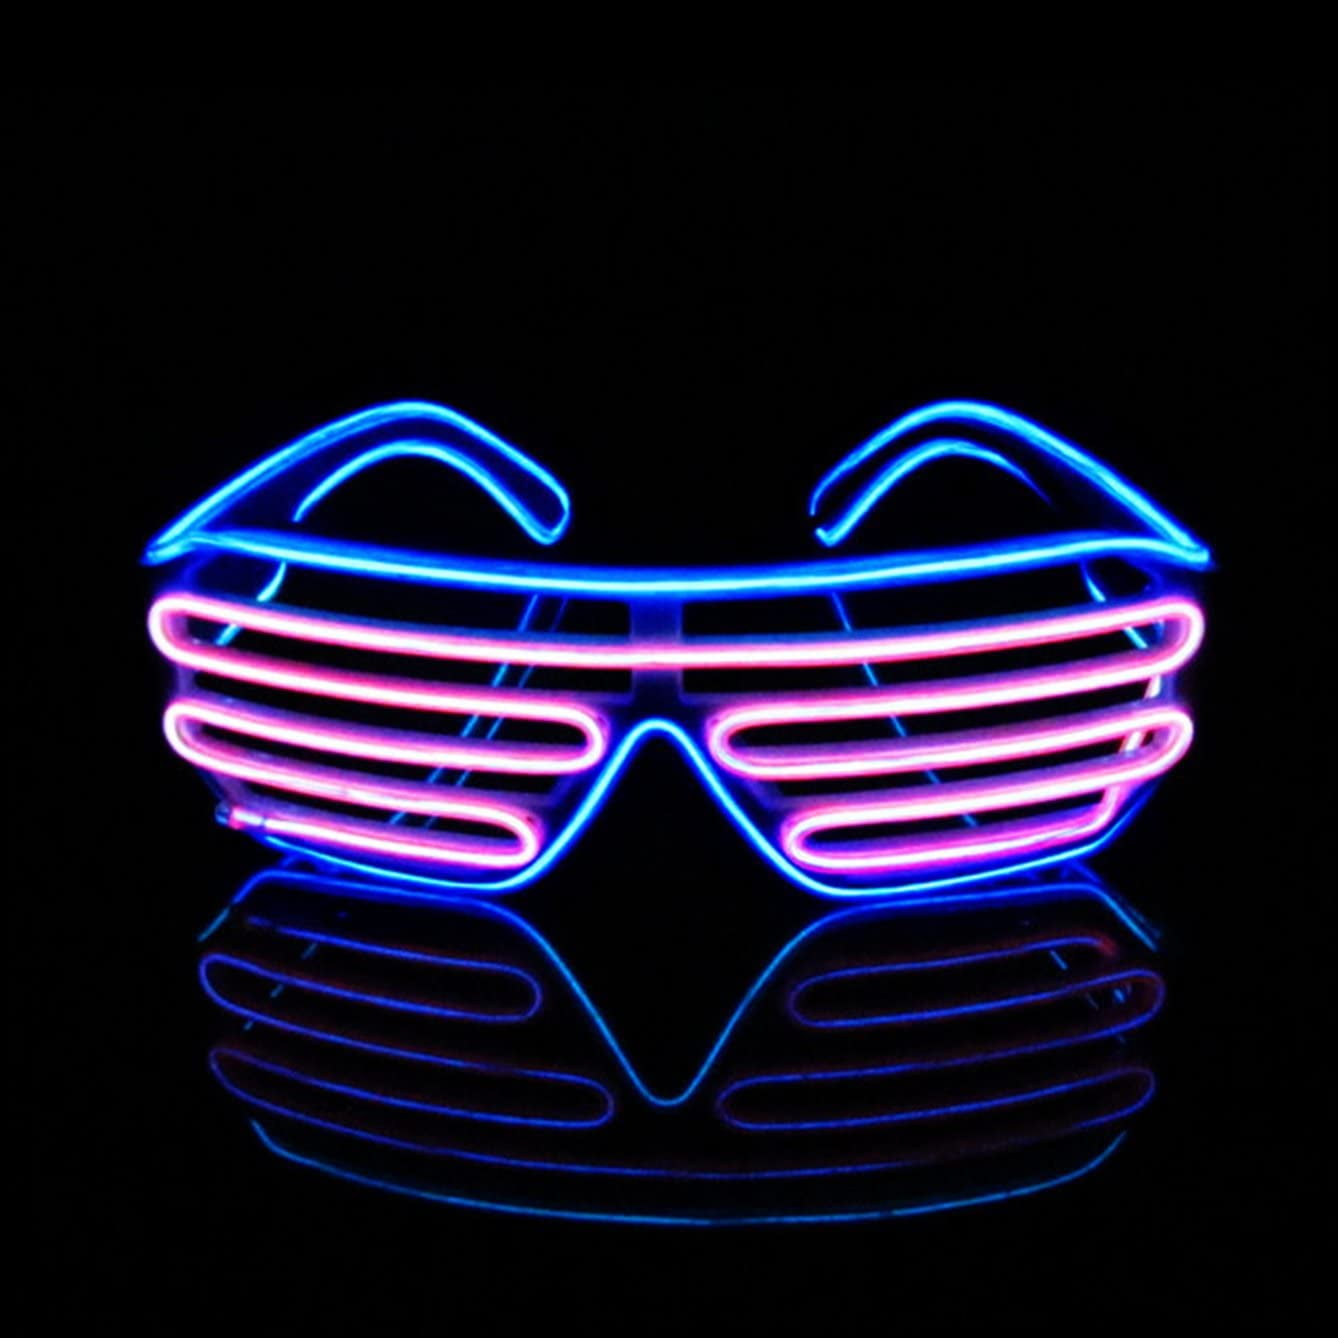 Blue Adults EL Wire Glasses Light Up Neon Shutter Luminous Party Eyeglasses For Concerts Clubs Bar Dj Raves Christmas Halloween Sci Fi Festivals & Disco Slotted Glow Illuminated Frames Unisex 